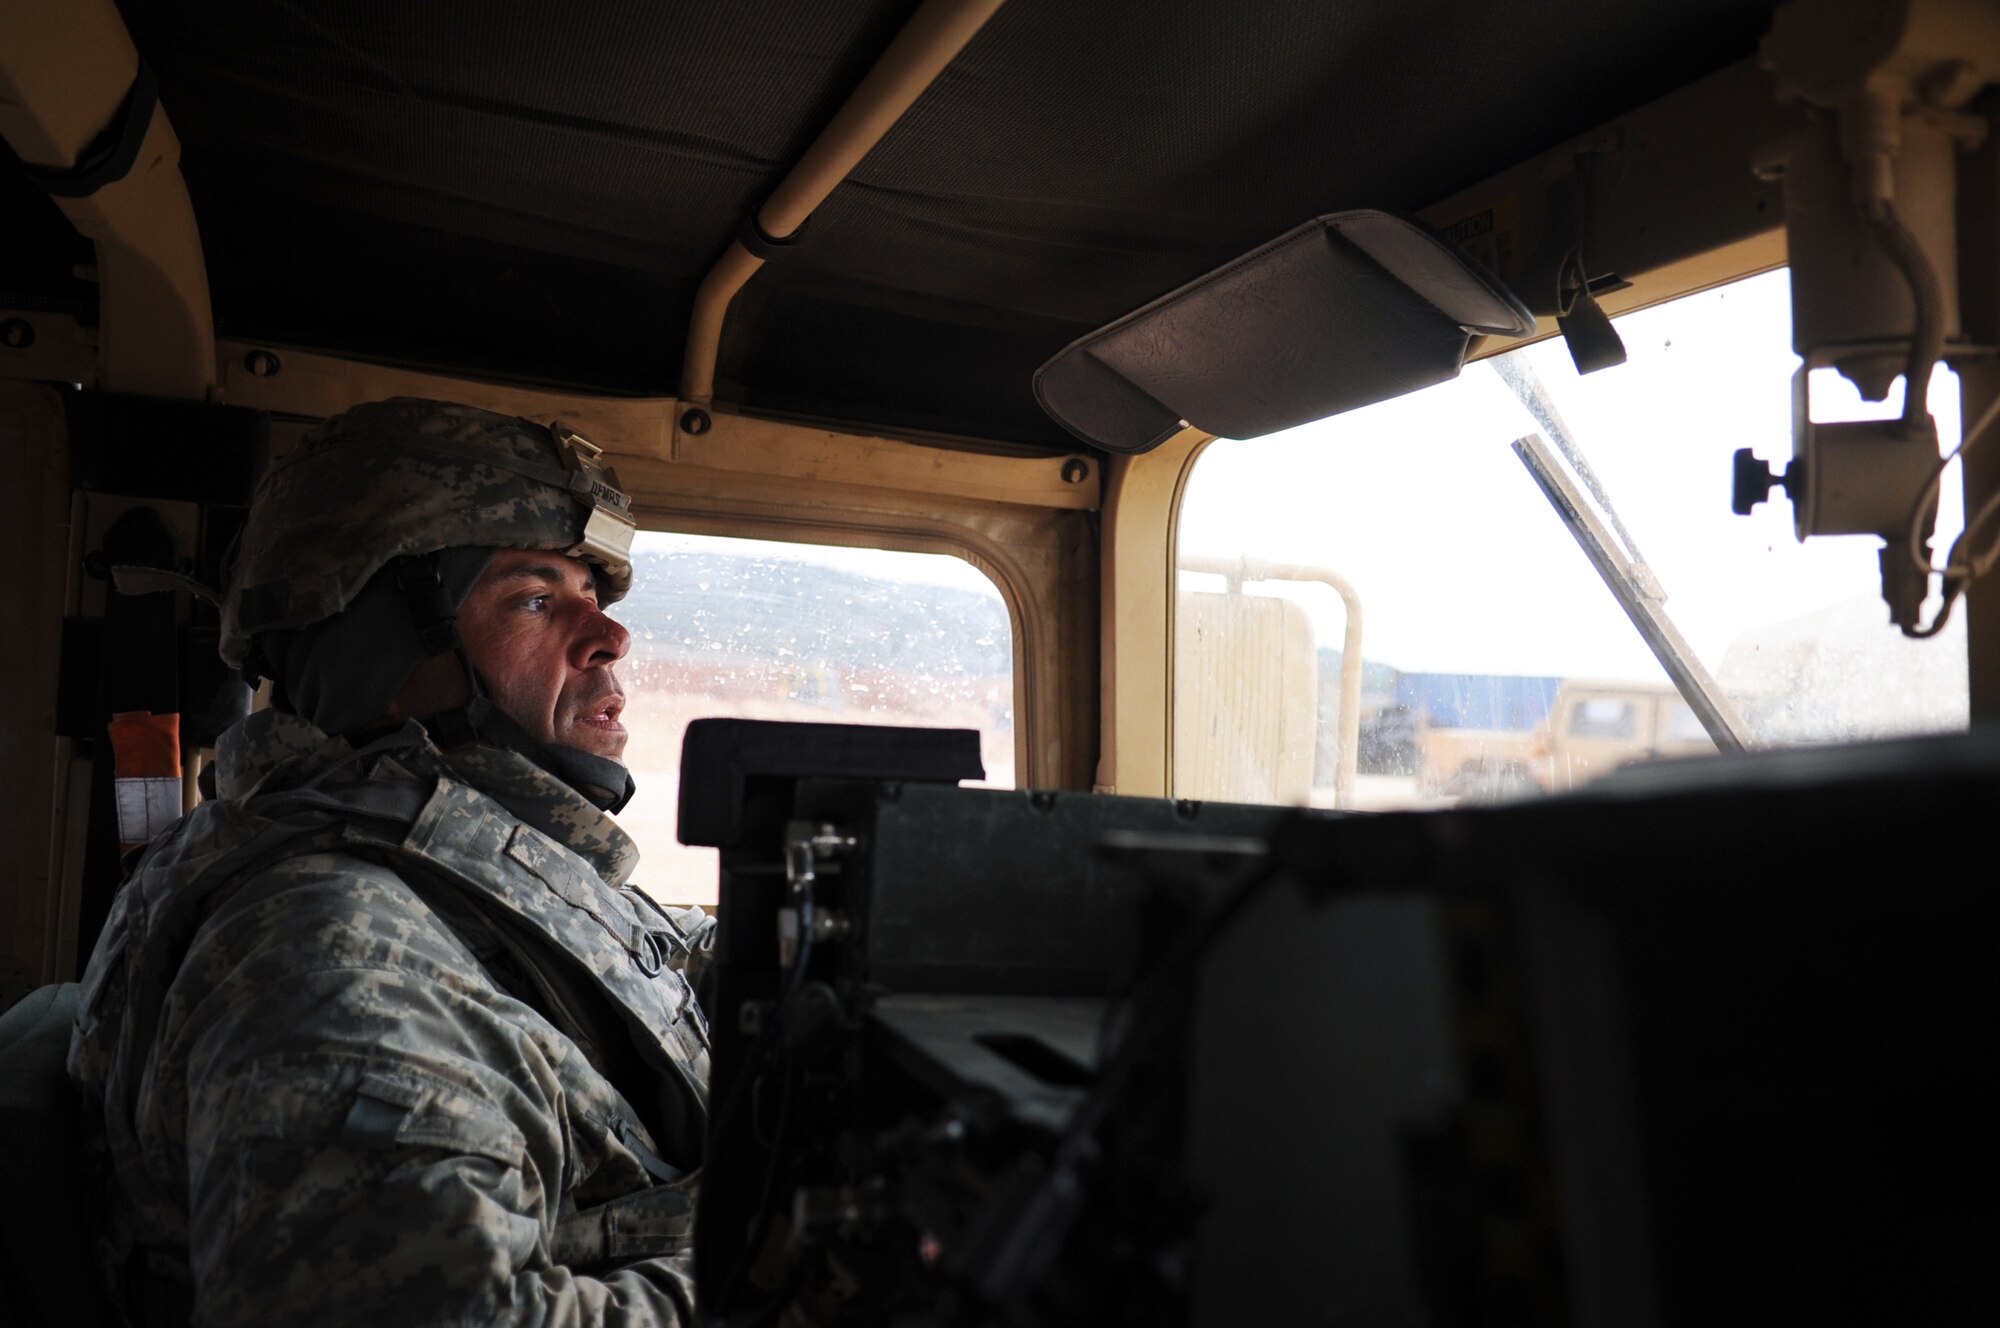 U.S. Army Sgt. 1st Class Mike Demps, 3rd Battalion, 2nd Air Defense Artillery NCO in charge of Charlie company, drives to check on the status of his soldiers Feb. 28, 2013, near Gaziantep, Turkey. The 3-2 ADA from Fort Sill, Okla. is deployed to Turkey as part of the NATO effort for a cooperative solution to promote regional stability and augment Turkey’s air defense capabilities. (U.S. Air Force photo by Senior Airman Daniel Phelps/Released)